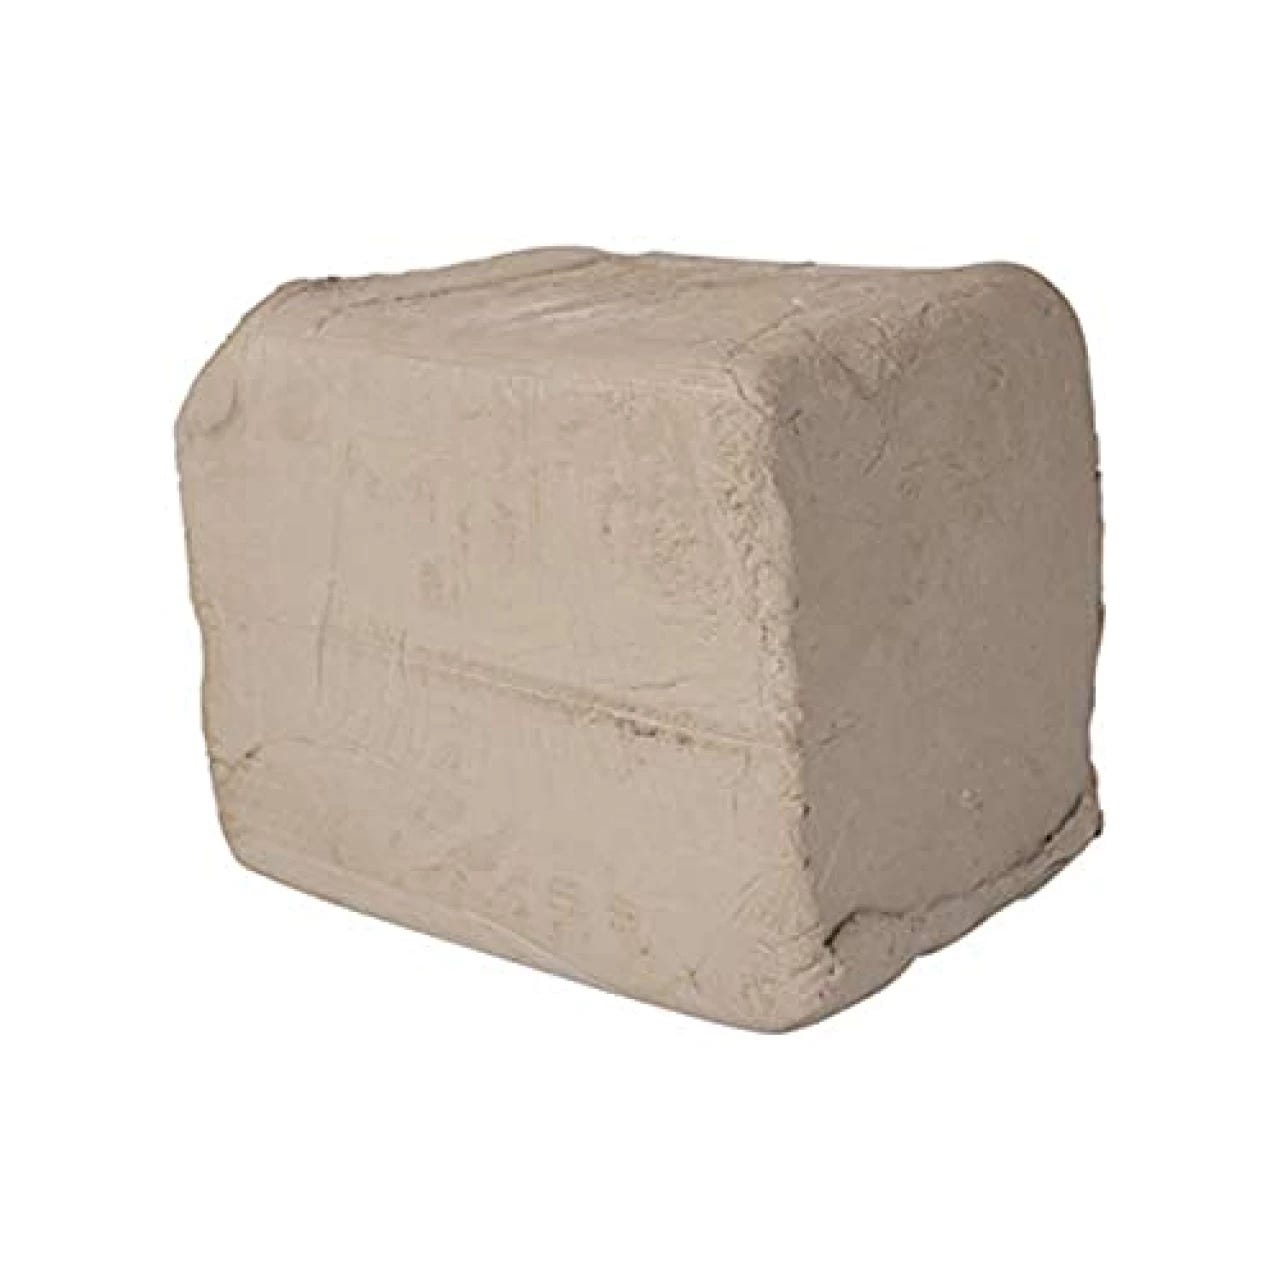 Deouss Mid High Fire White Stoneware Clay for Pottery;Mid Fire Cone  5-7;Ideal for Wheel Throwing,Hand Building,Sculpting;Great for All Skill  Levels